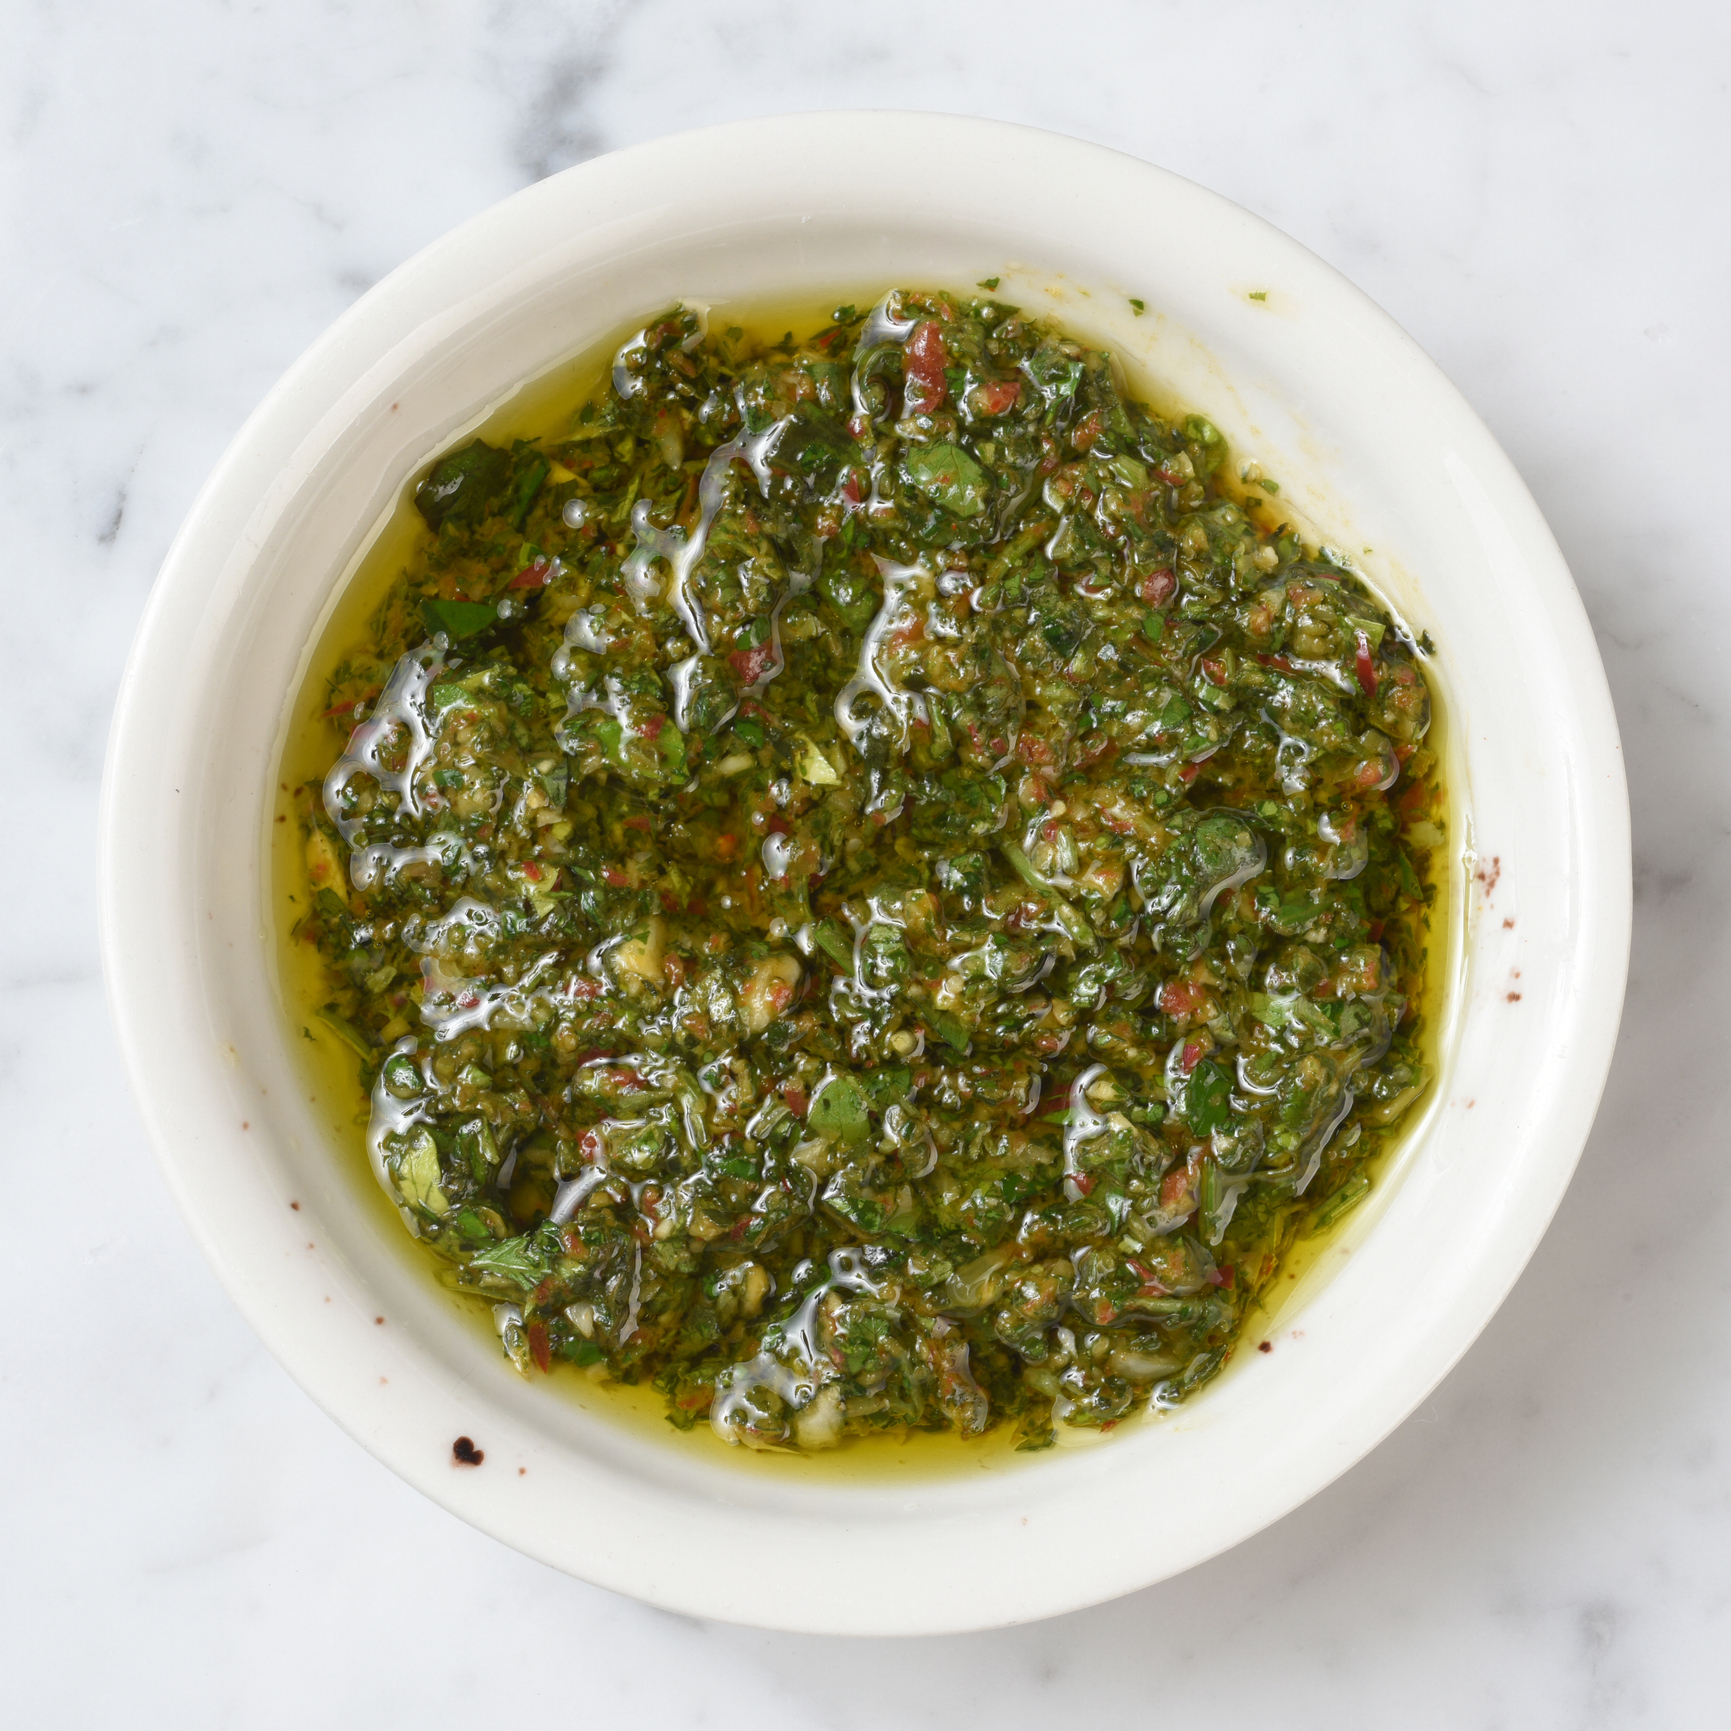 Bowl of chimichurri sauce with herbs and oil visible on a countertop